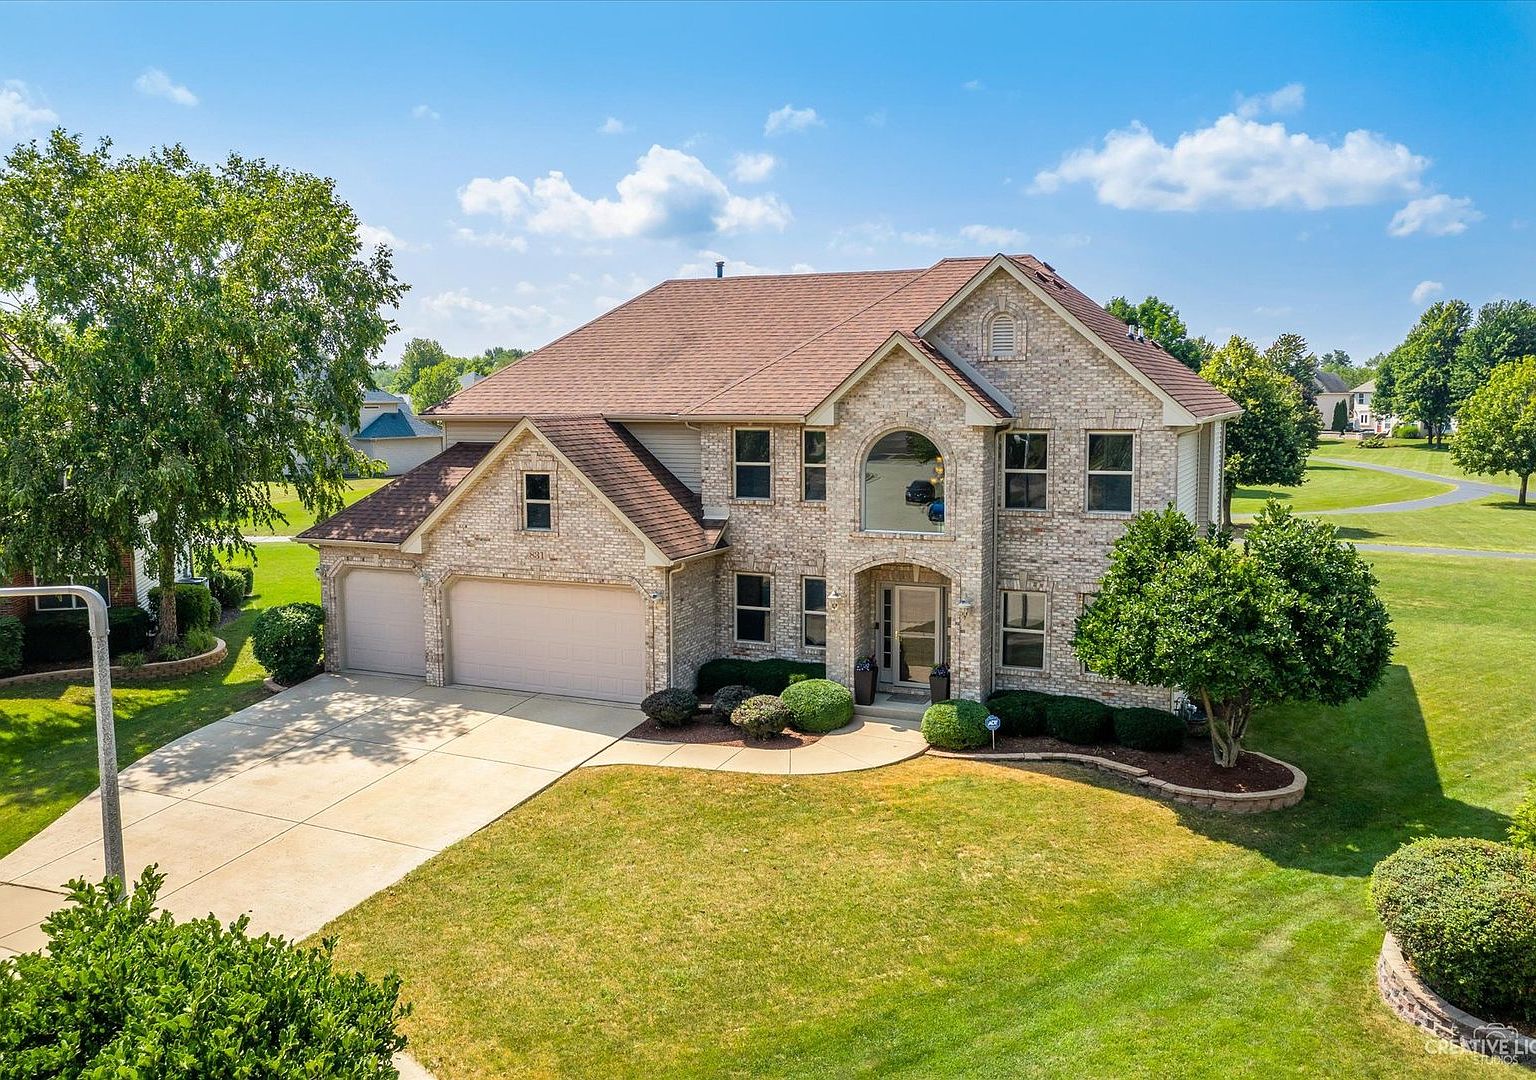 831 Haley Ct, Yorkville, IL 60560 | Zillow